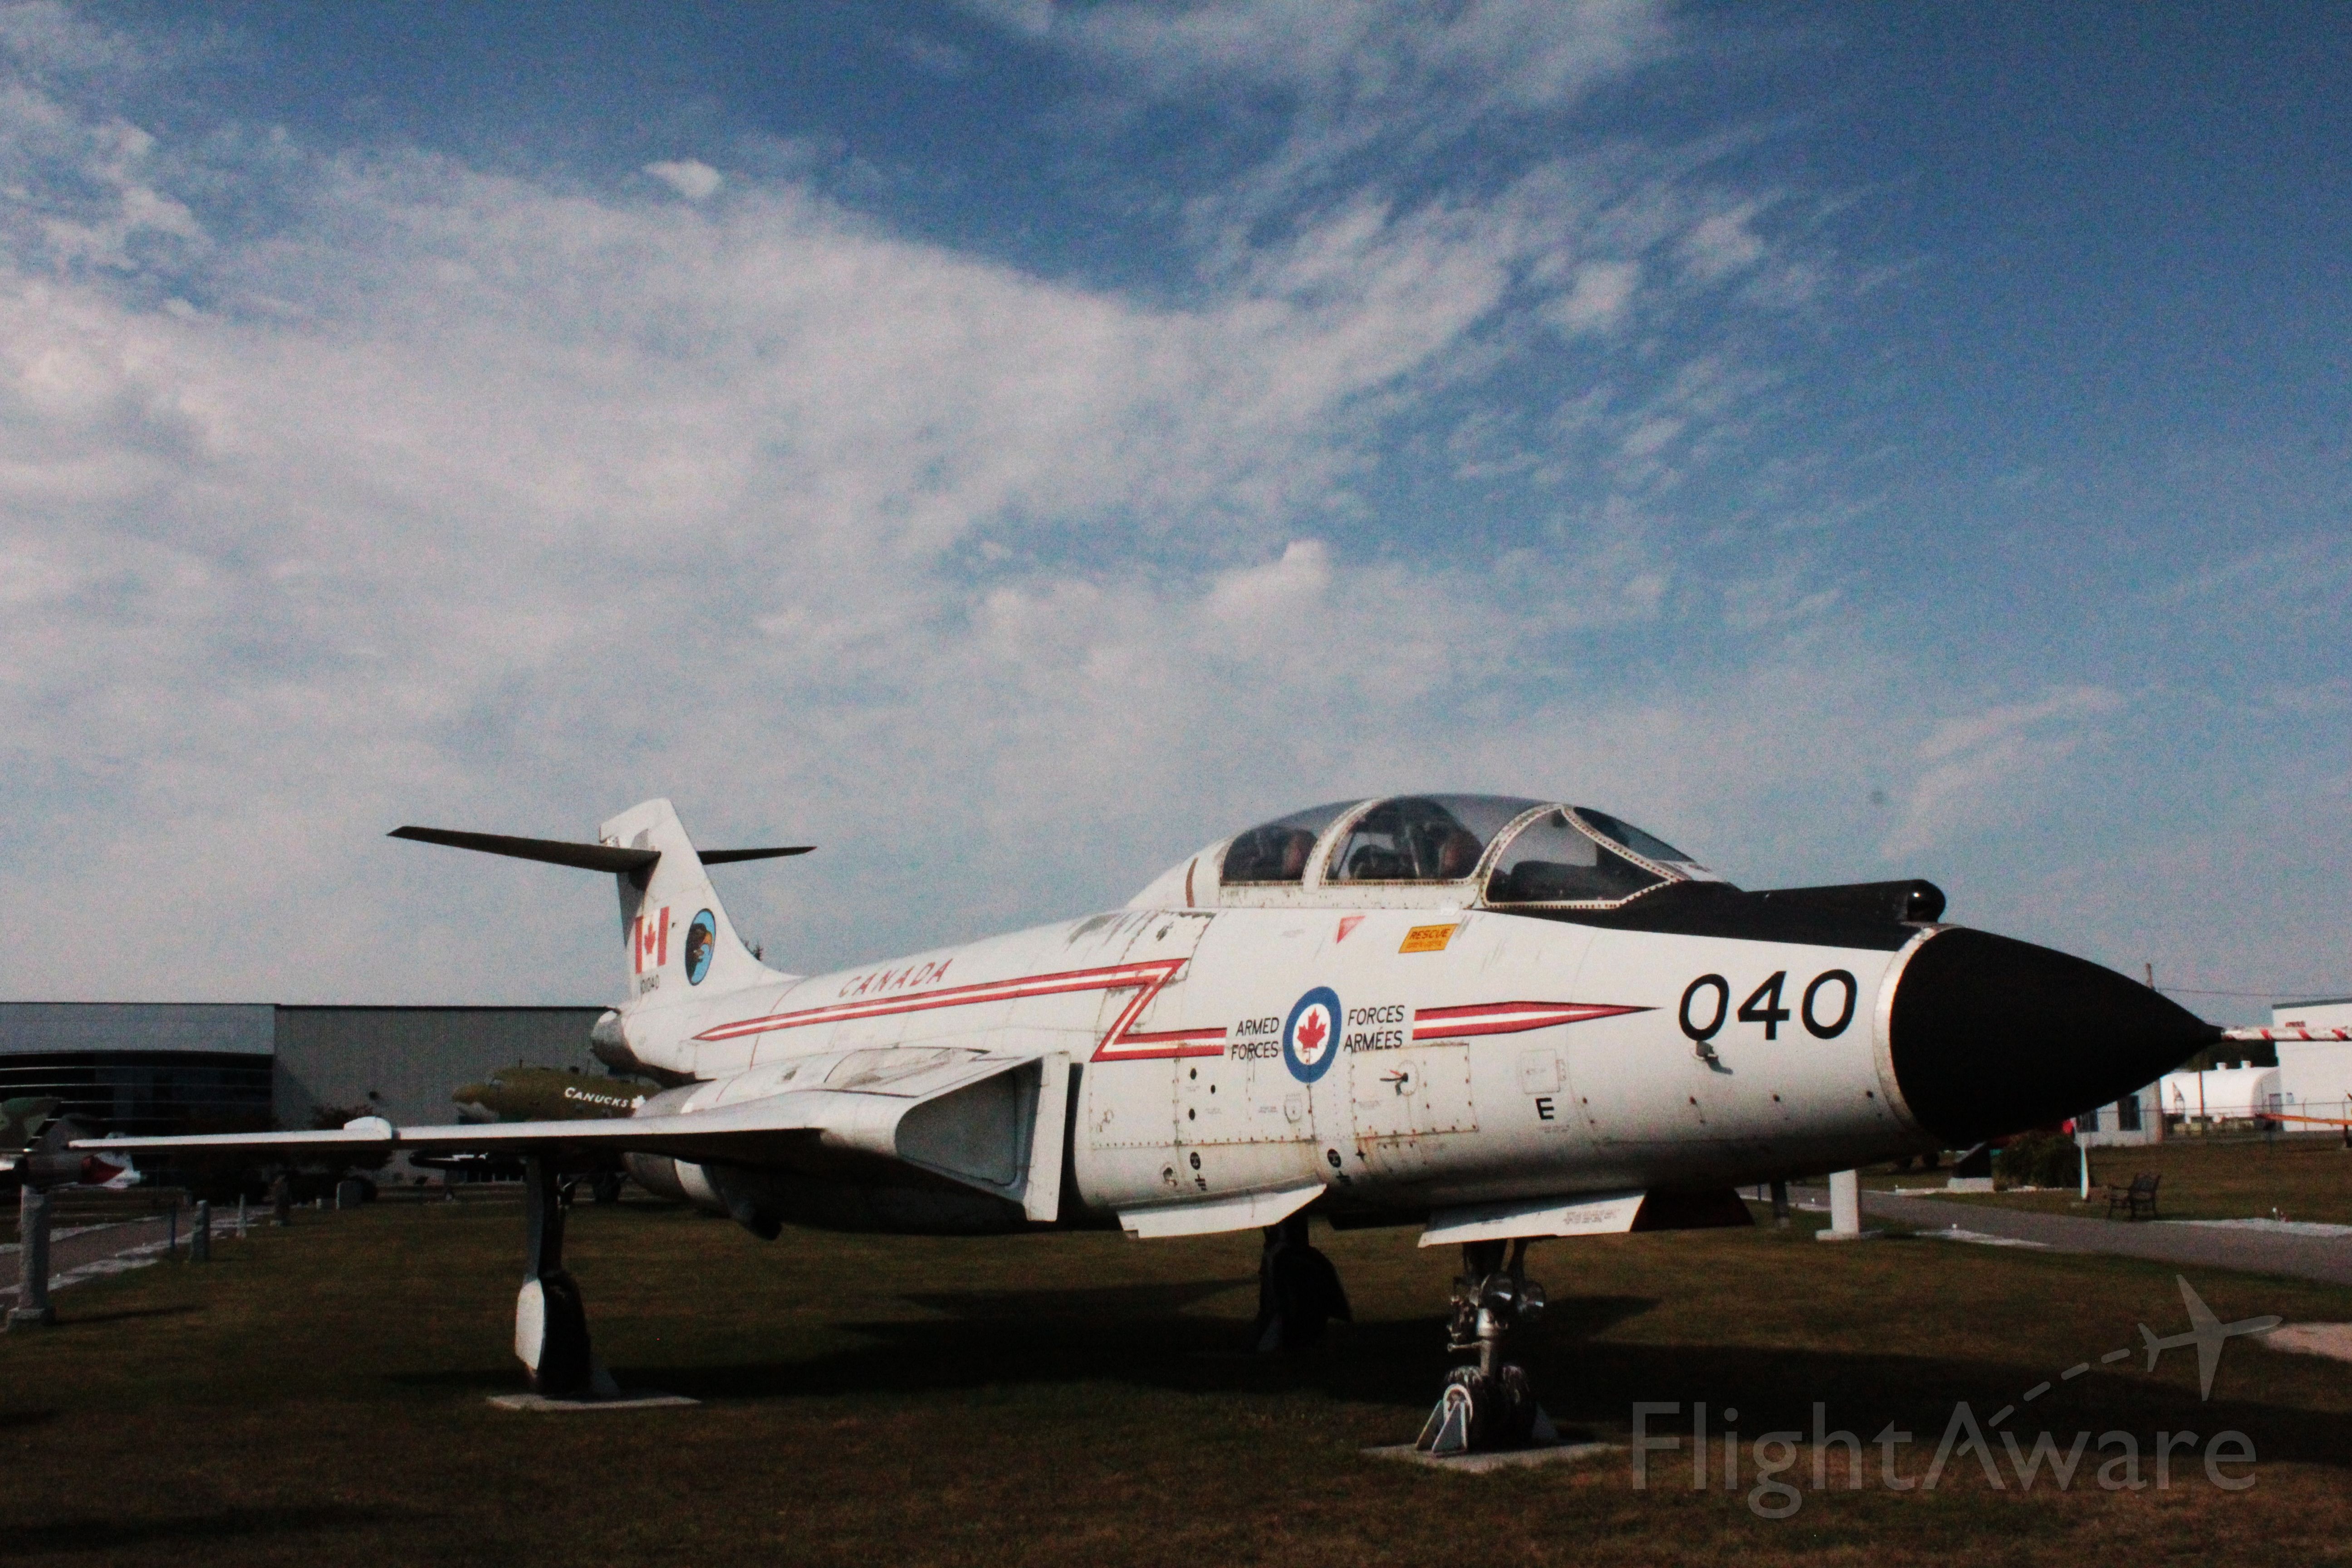 10-1040 — - National Air Force Museum of Canada. Served 409 Nighthawk Squadron Comox, BC 1971-1984